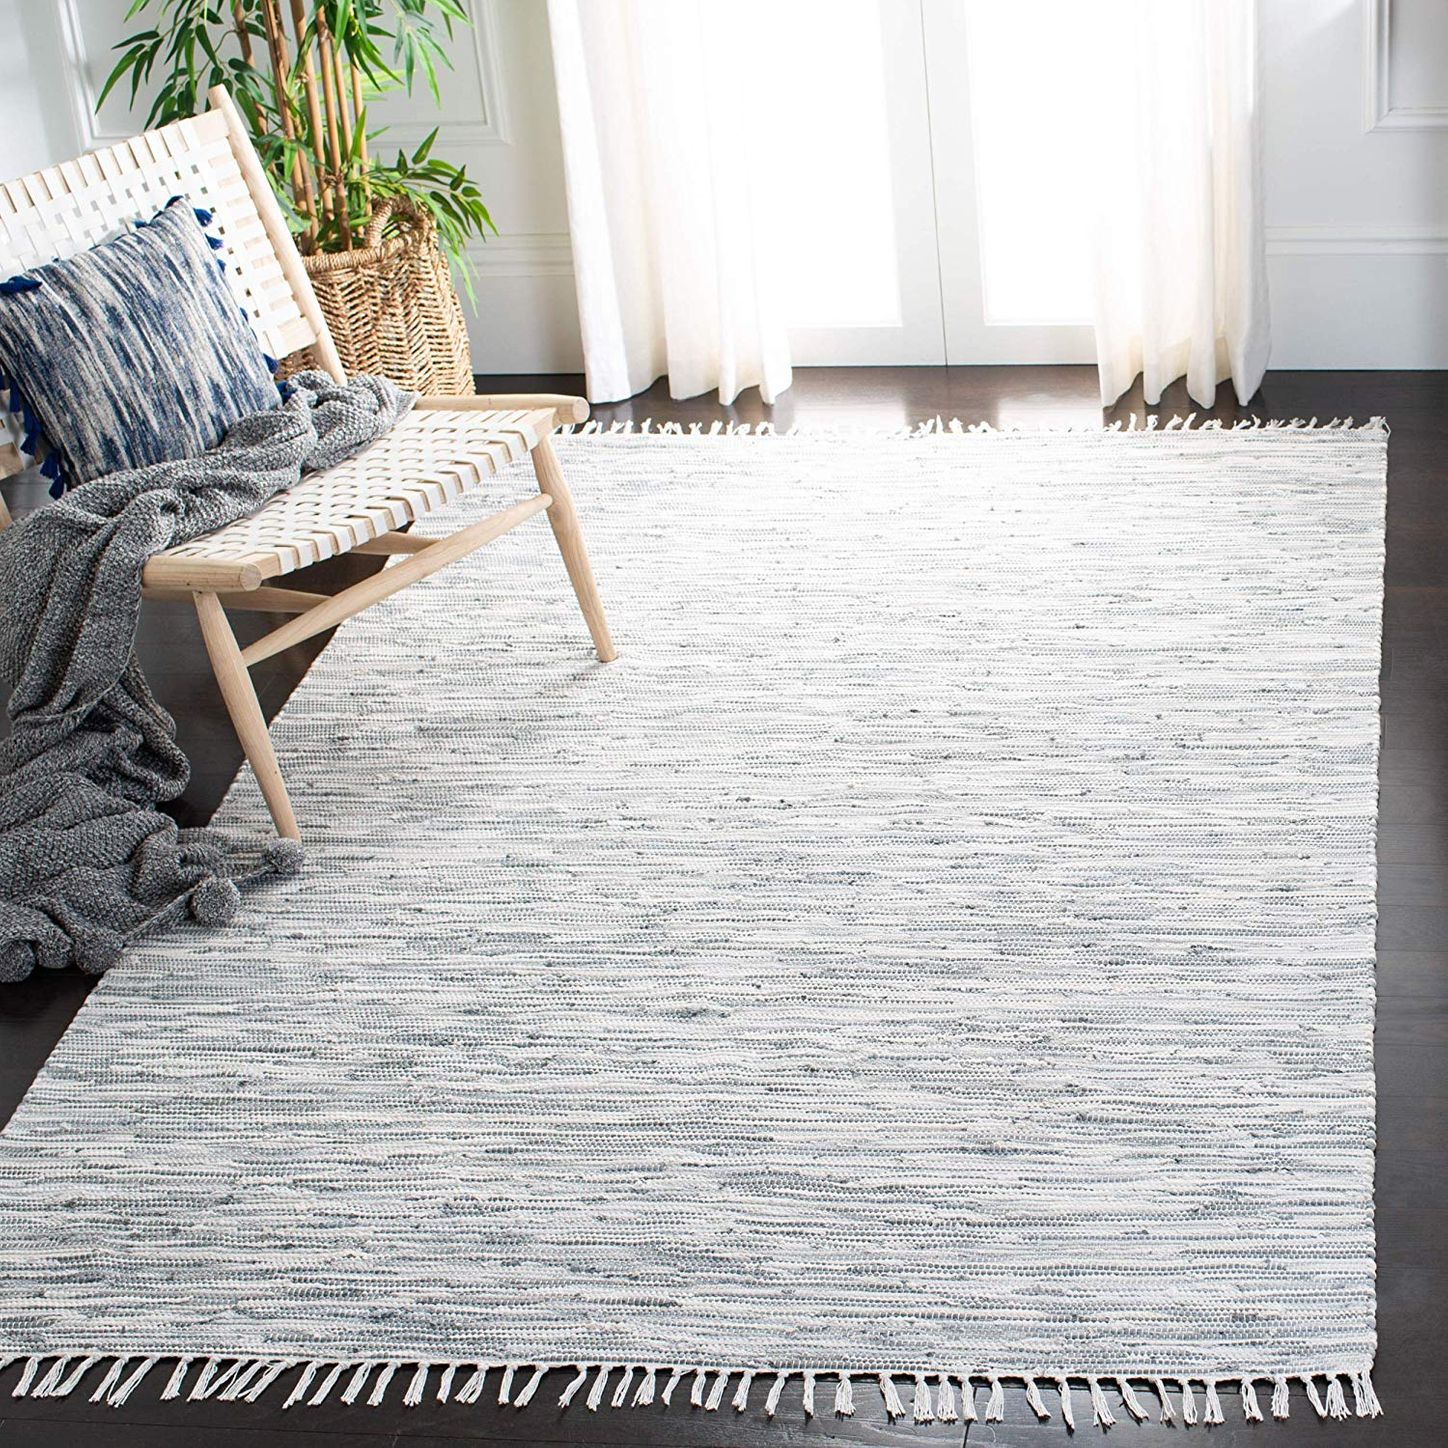 The 16 Best Washable Rugs 2021, Designer Area Rugs Canada